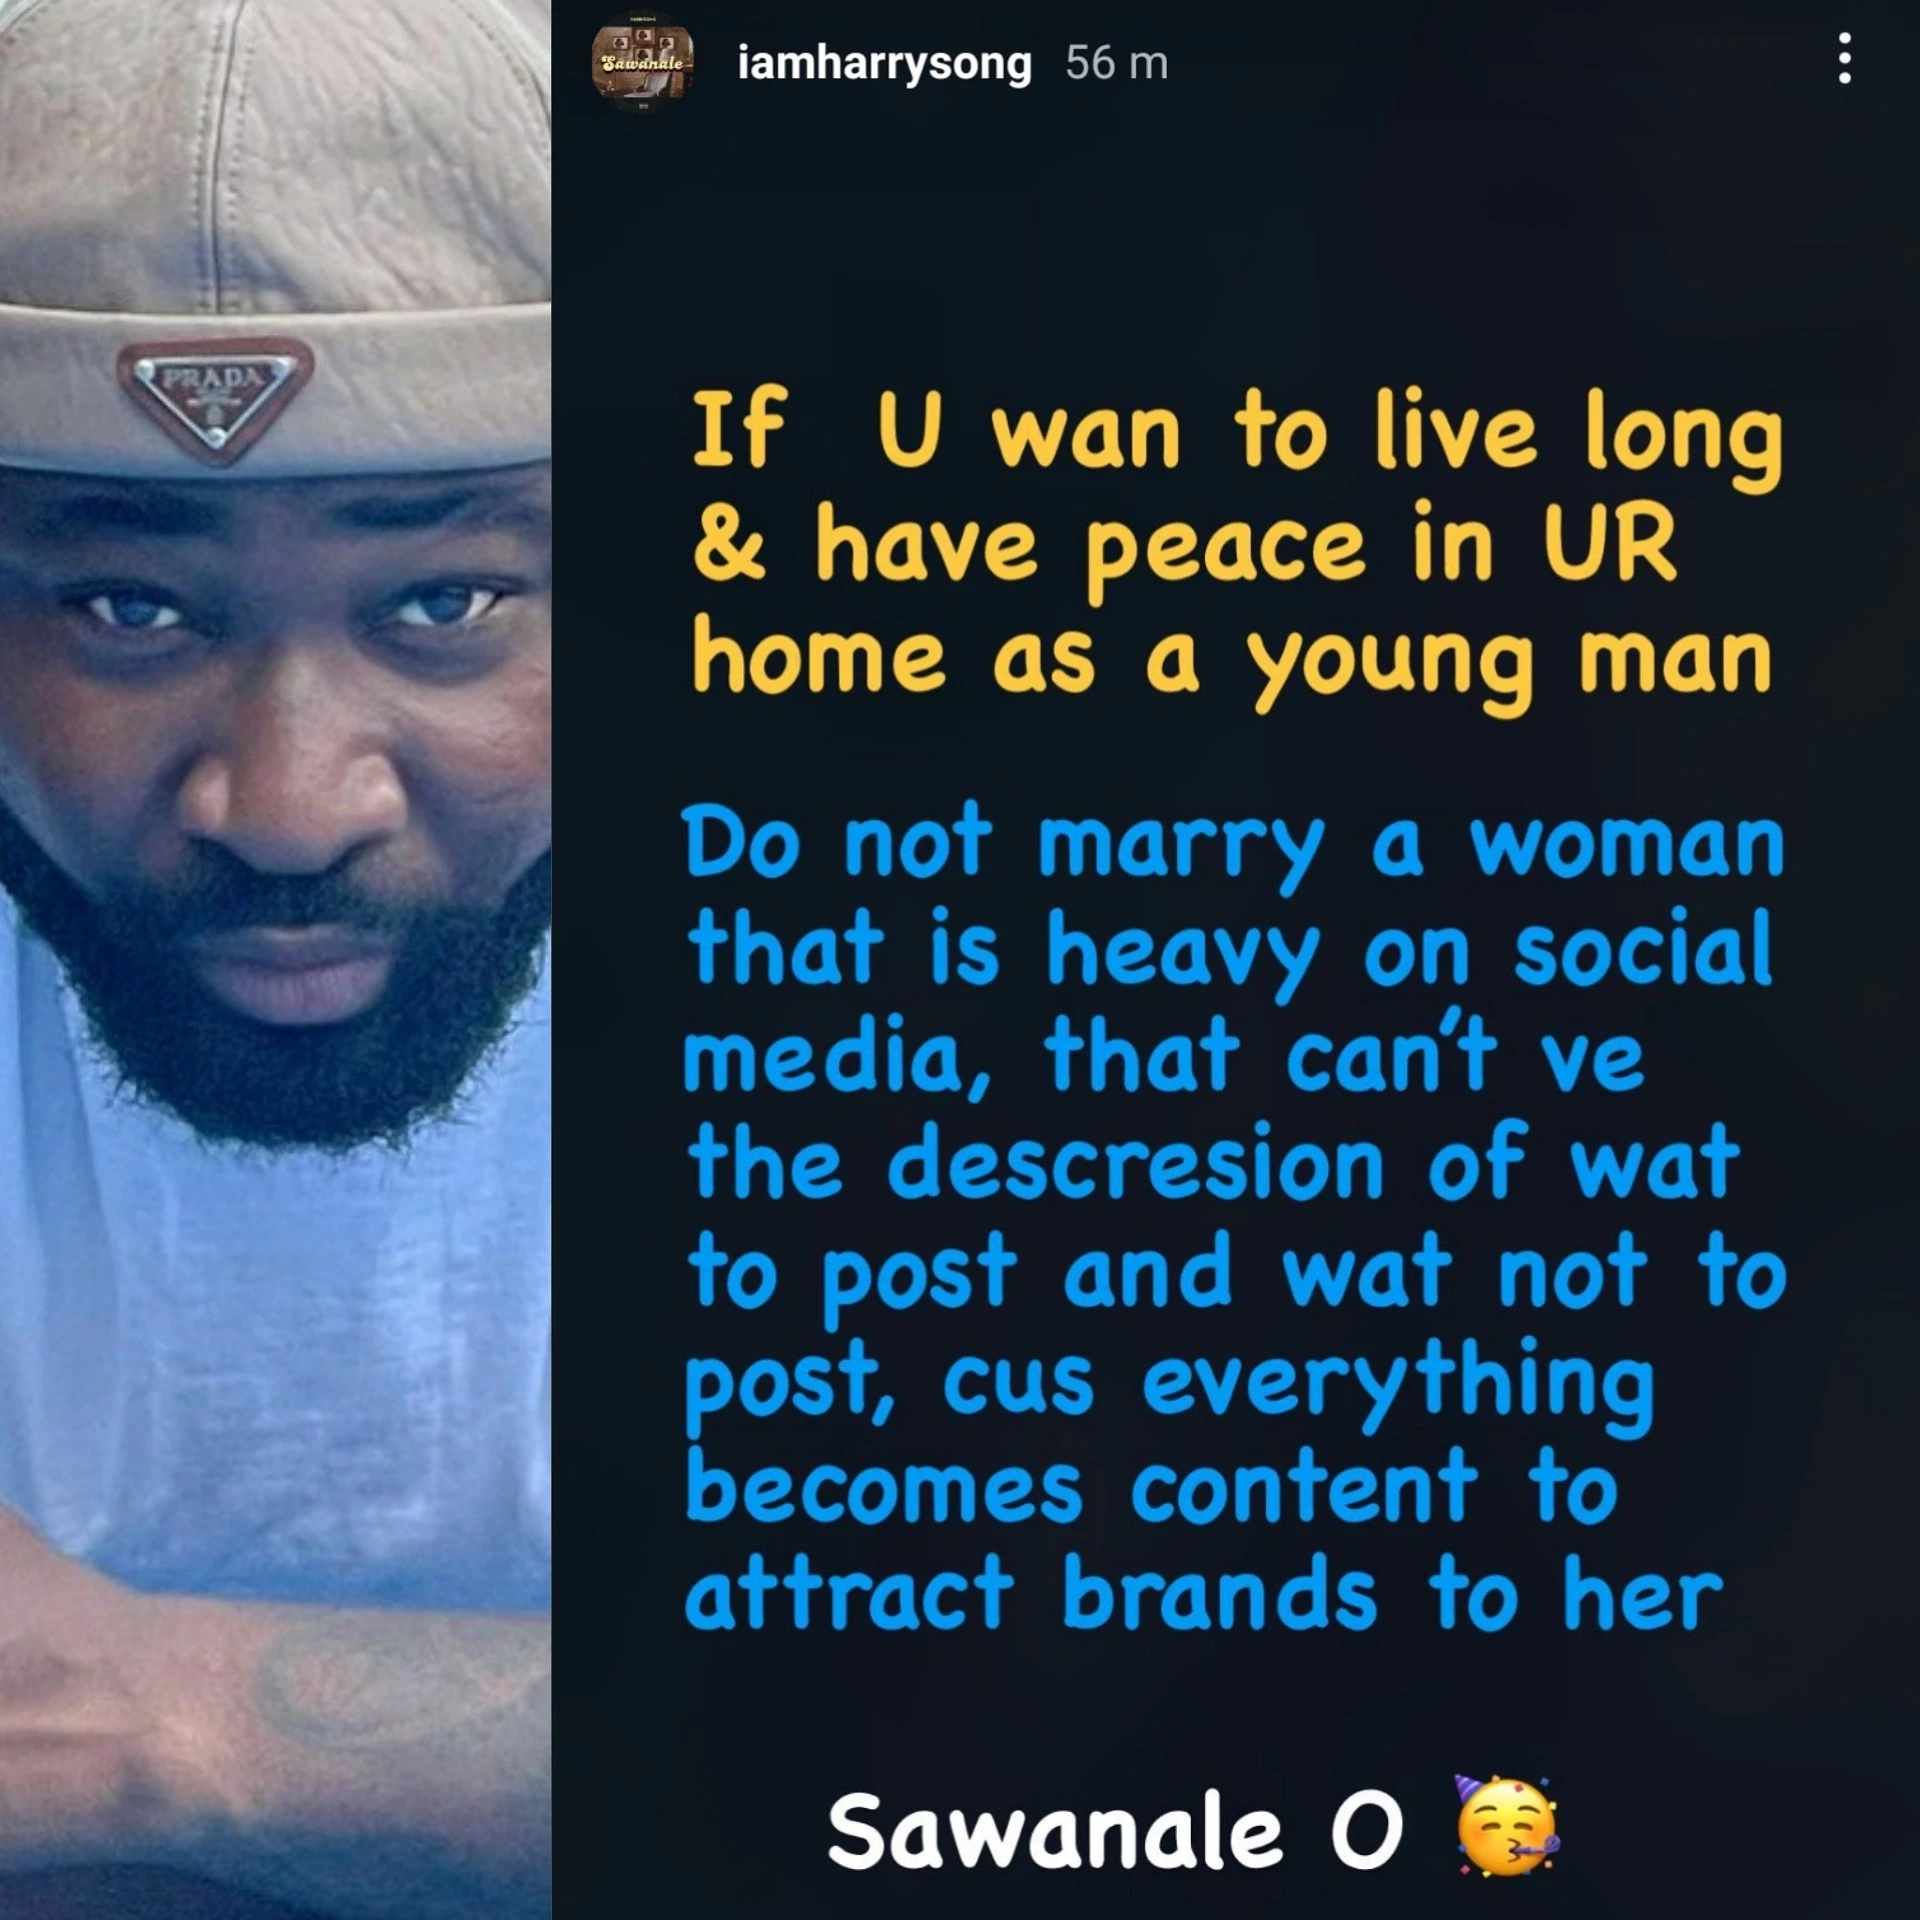 AnnieIdibia/2face: Do not marry a woman that is heavy on social media- Singer HarrySong advises young men